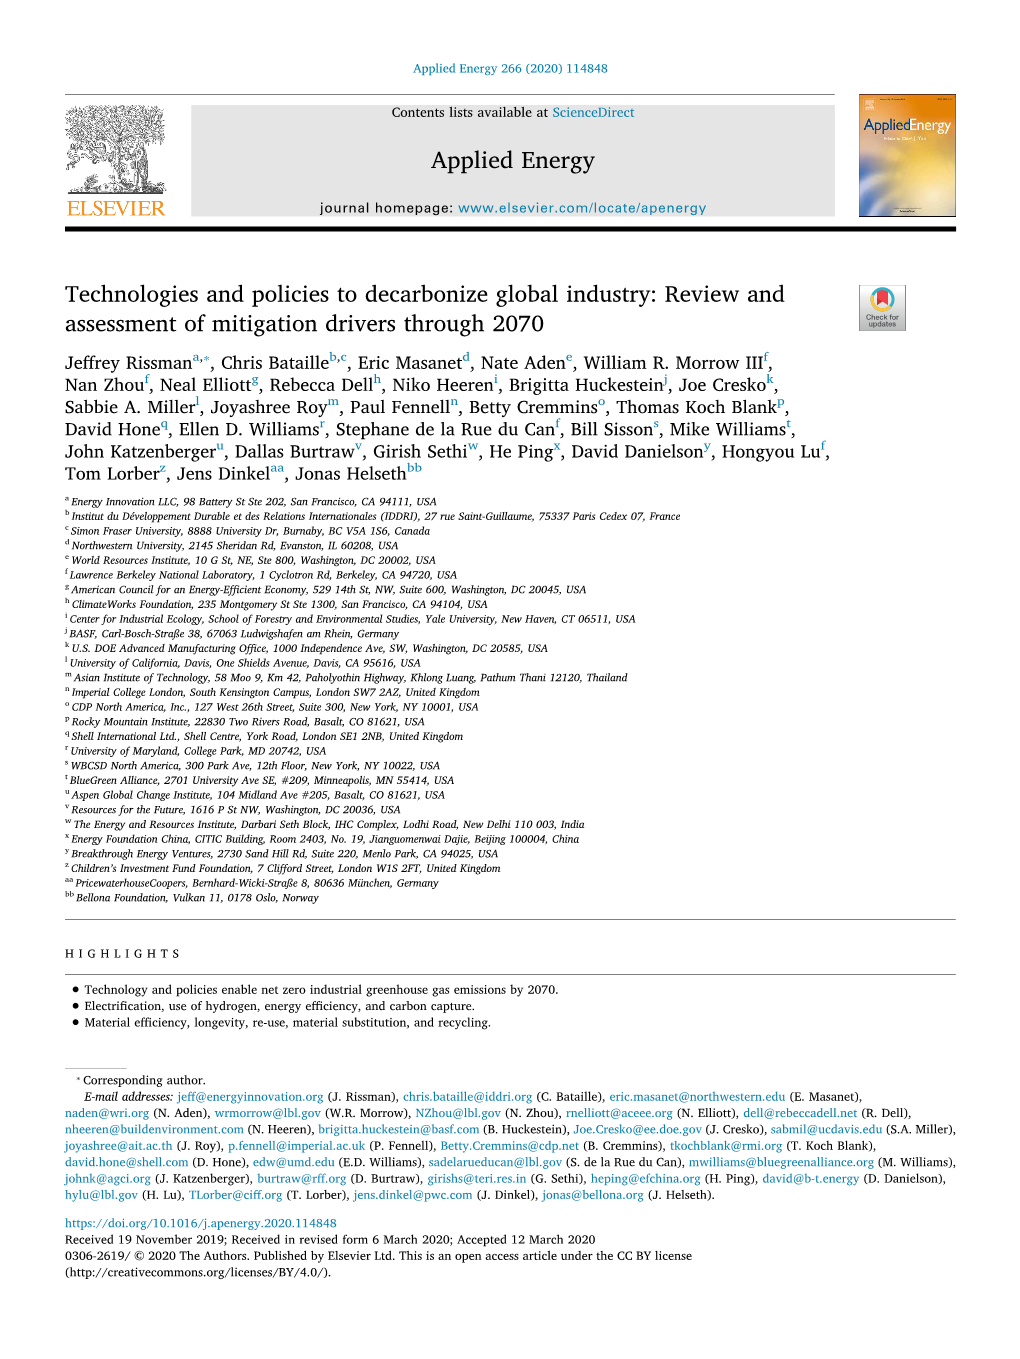 Technologies and Policies to Decarbonize Global Industry Review and Assessment of Mitigation Drivers Through 2070